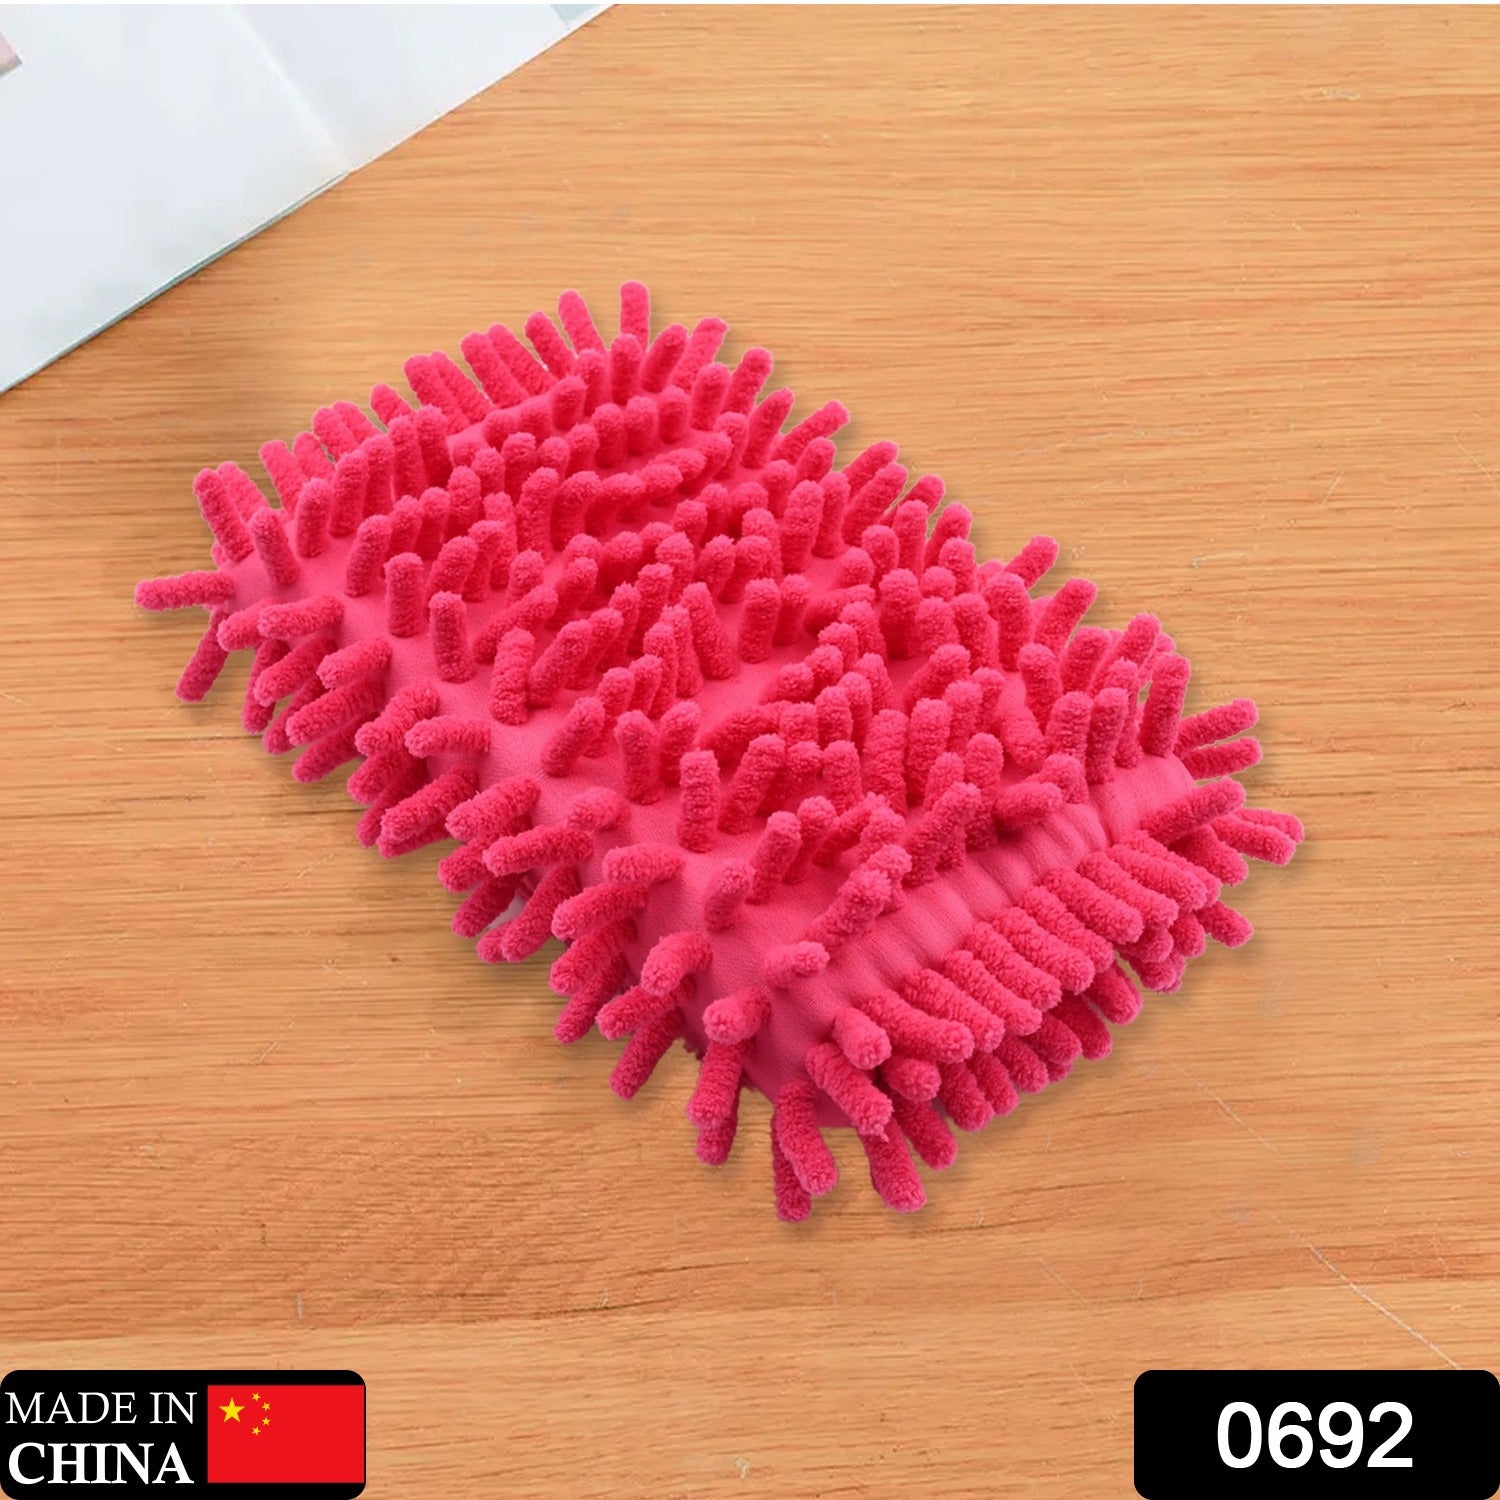 0692 Multipurpose Microfiber Duster Whiteboard Eraser  Washable Dry Eraser Board Eraser Cleaning Sponge for Chalk, Classroom Teacher Supplies, Home and Office, Car Washing Scratch-Free Microfiber Brushes